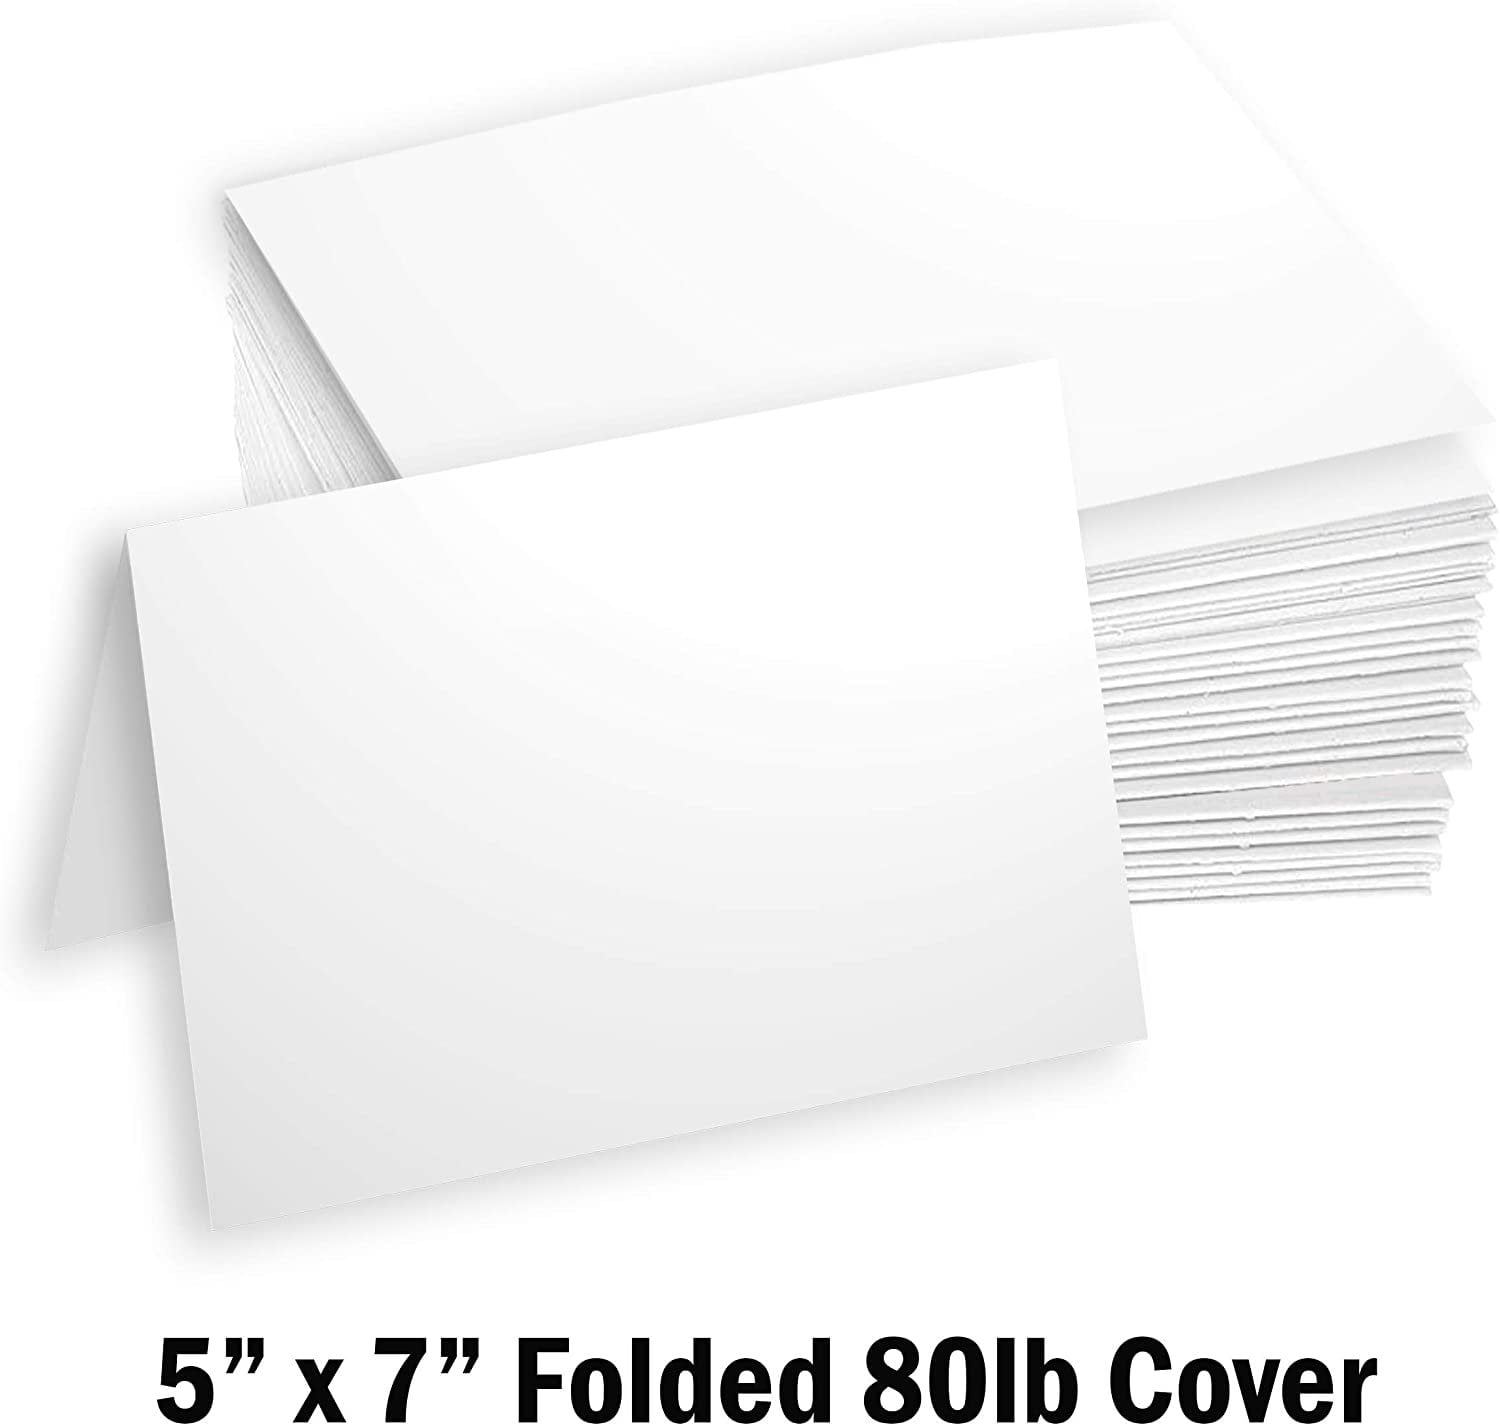 5 x 7 Blank Folded Cards 100 Pack Hamilco Linen Cardstock Thick Paper Heavy weight 100 lb Card Stock for Printer Greeting Invitations Stationary